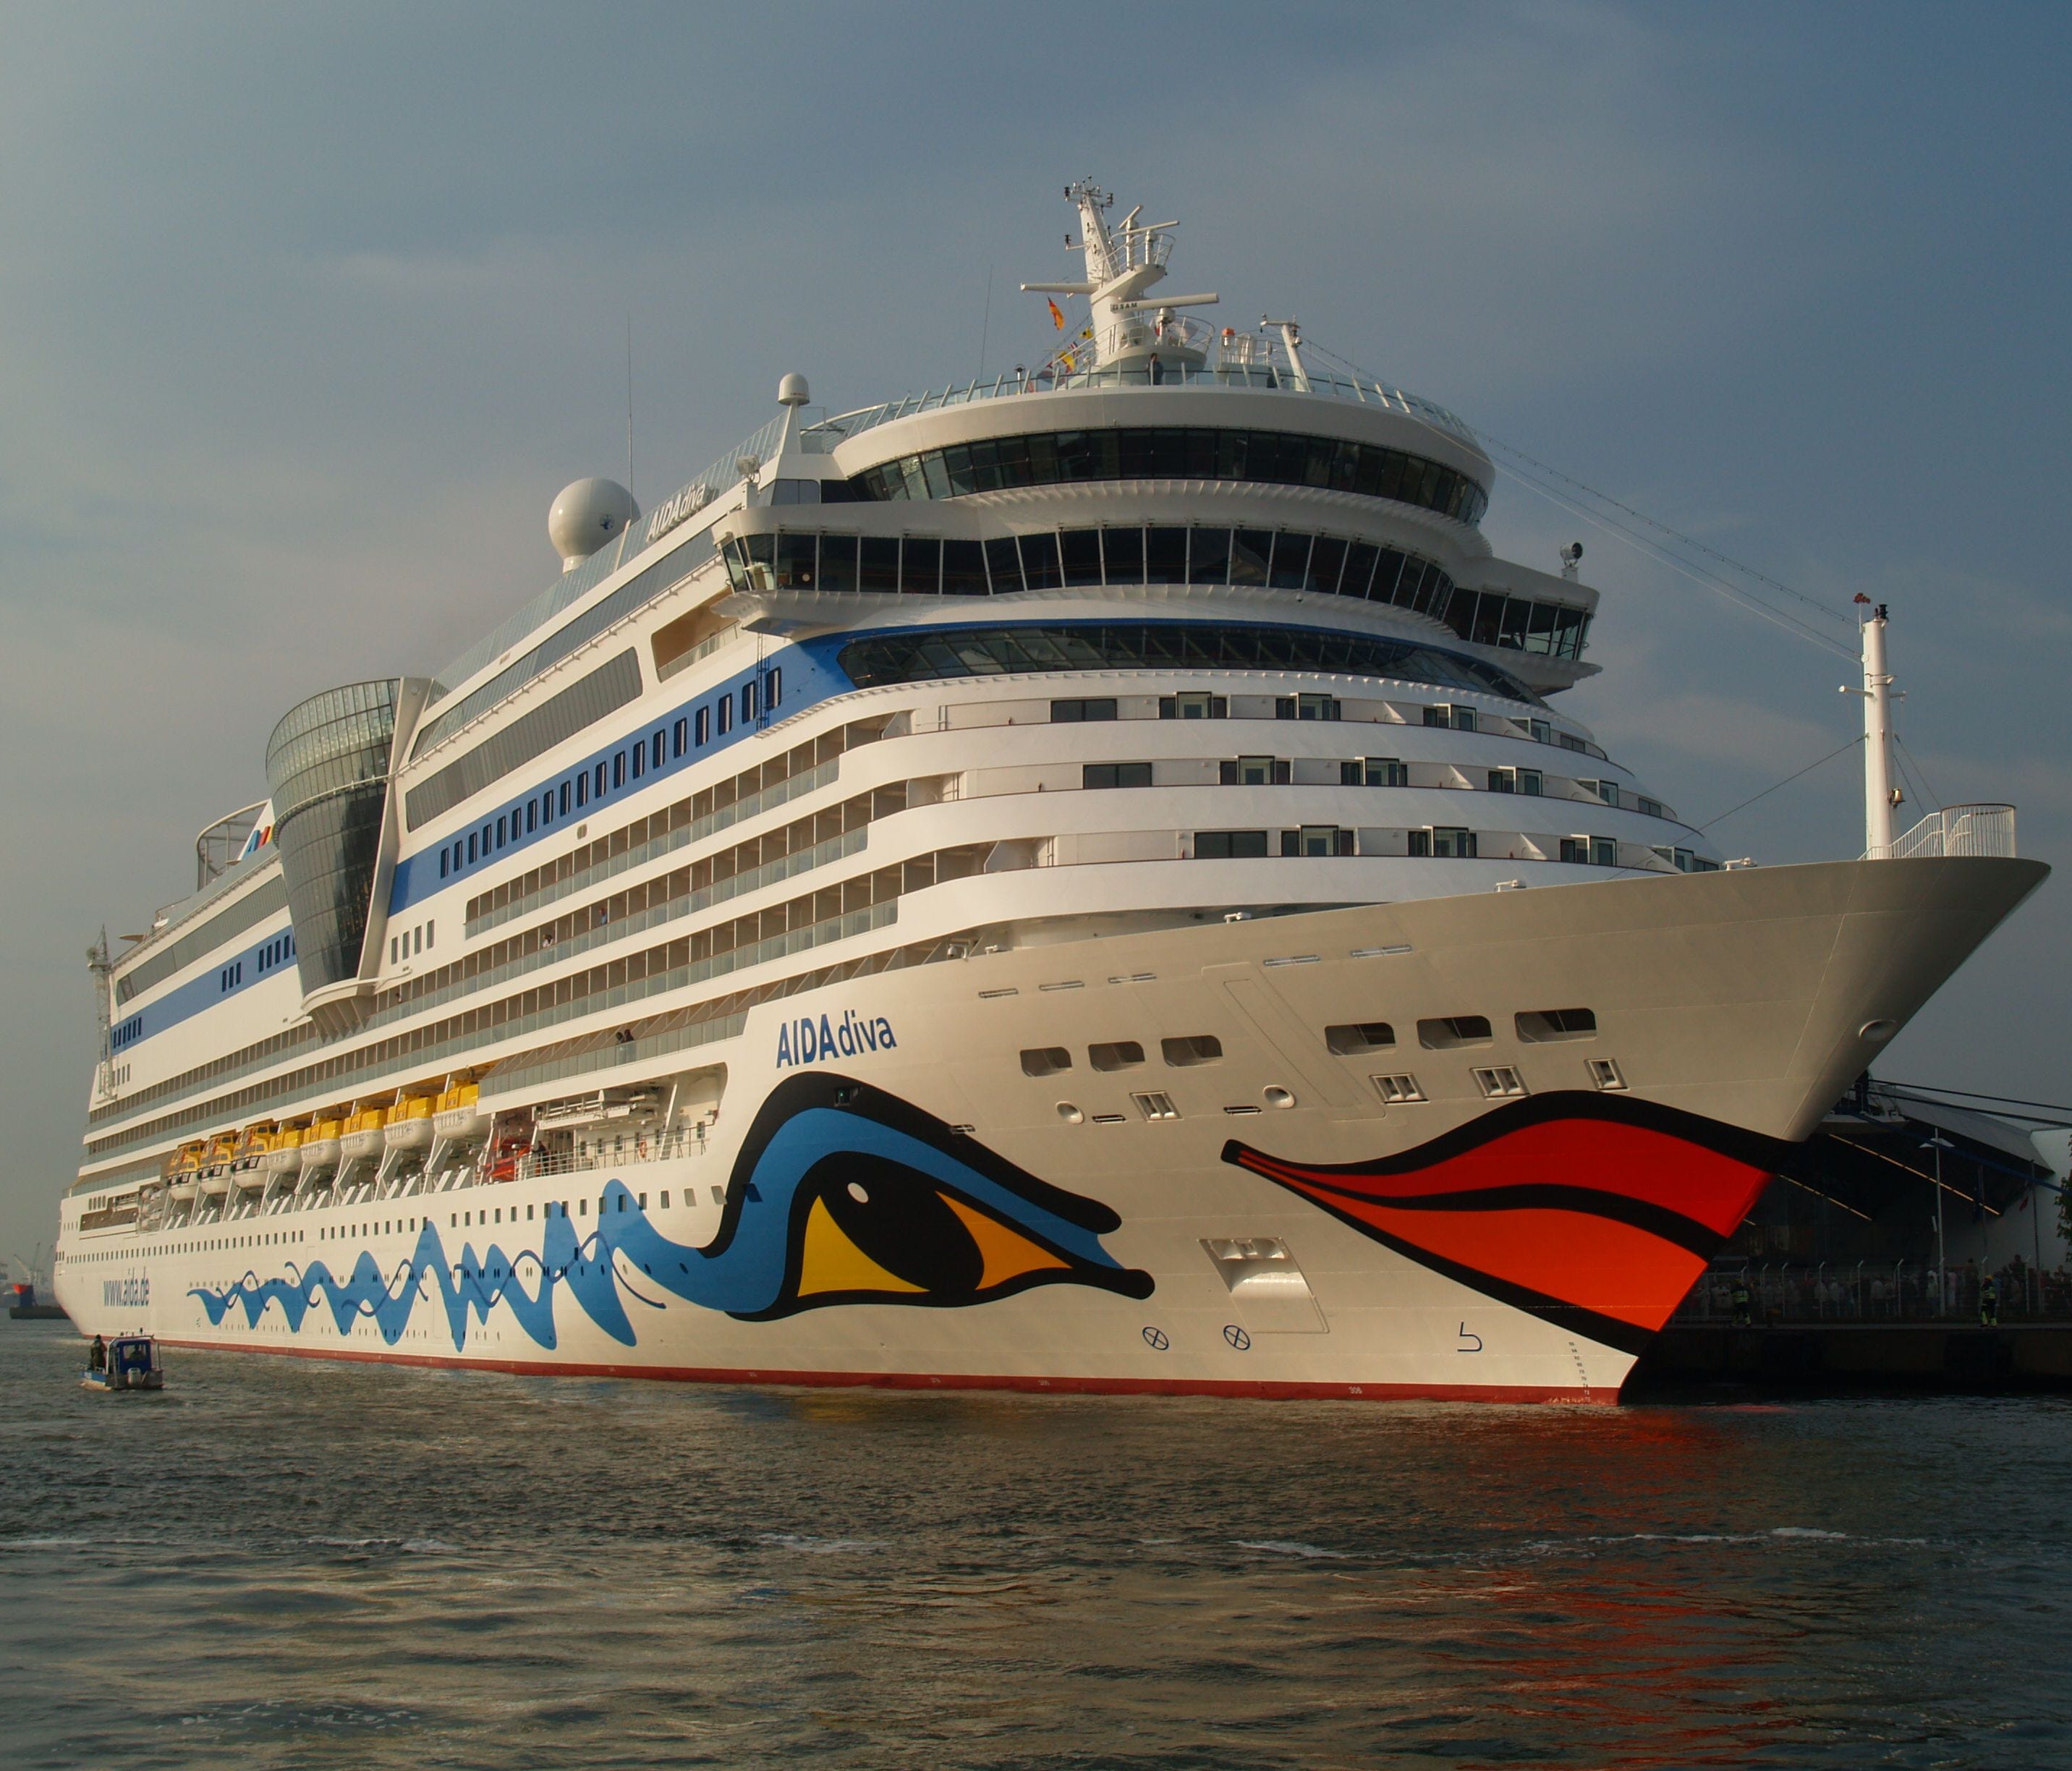 Yes, those are giant red-and-orange lips on the front of a cruise ship. German line Aida Cruises has made the multi-deck-high lips on its ship hulls a signature. Aida is credited with starting the hull art trend way back in the 1990s.